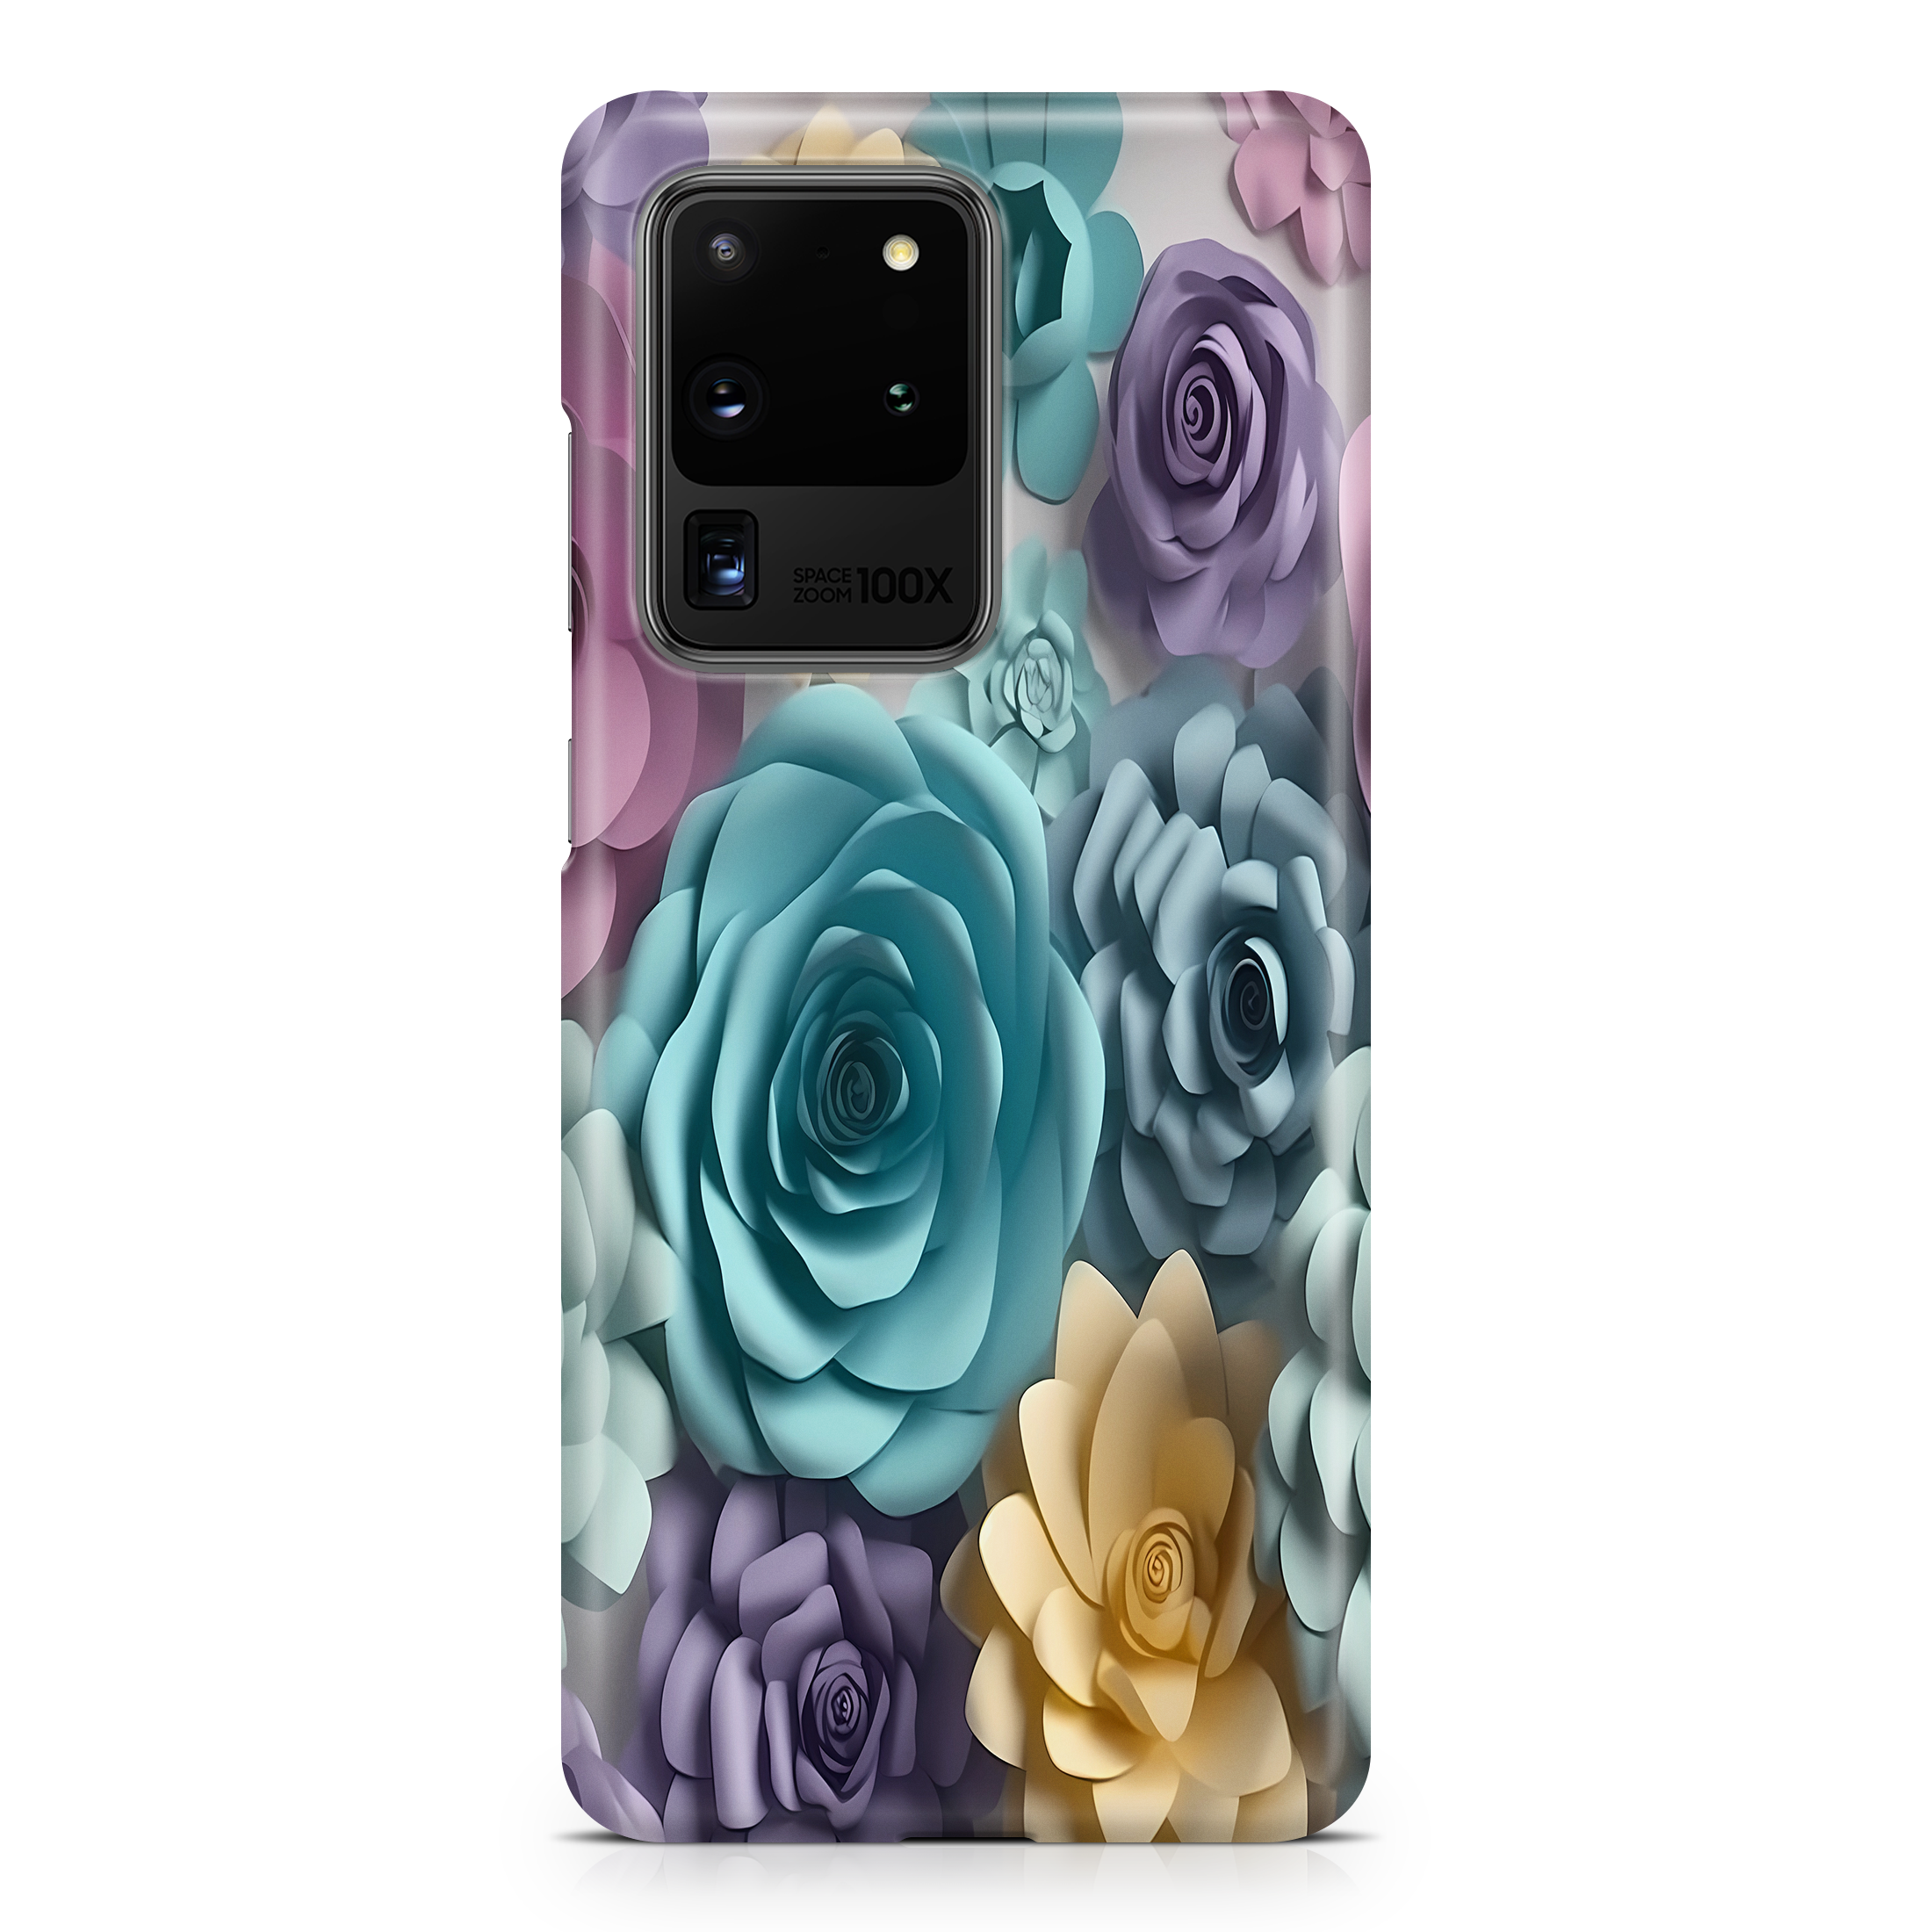 Harmony Blooms - Samsung phone case designs by CaseSwagger